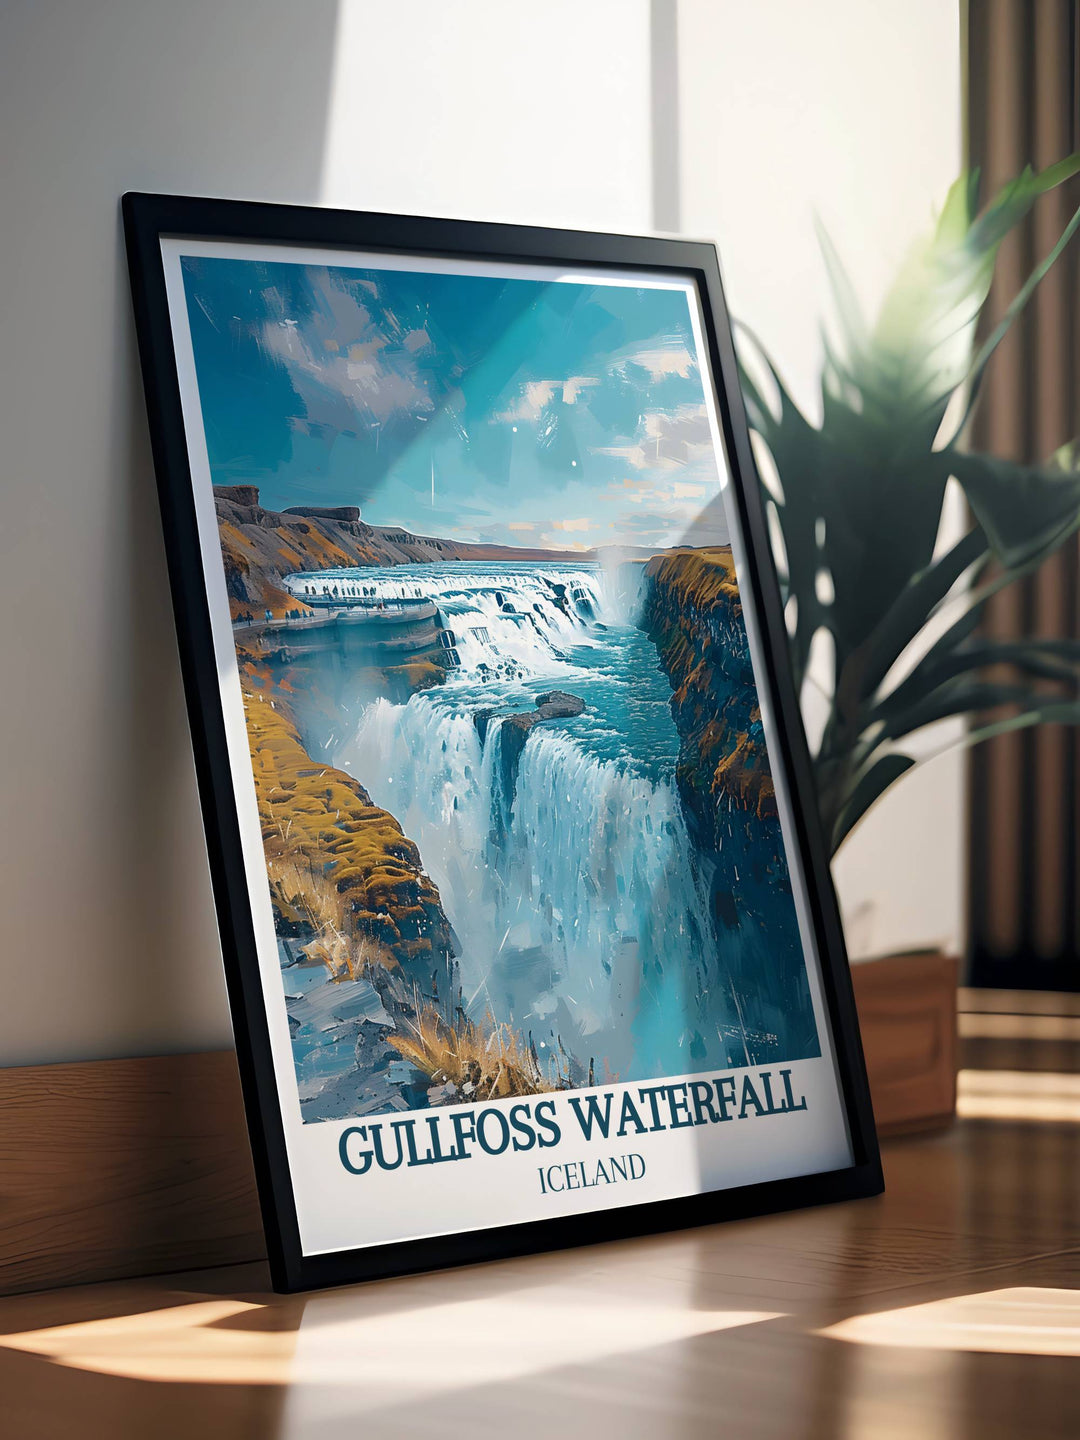 Sunset over Gullfoss Waterfall creating a golden silhouette, beautifully depicted in a vintage travel print.